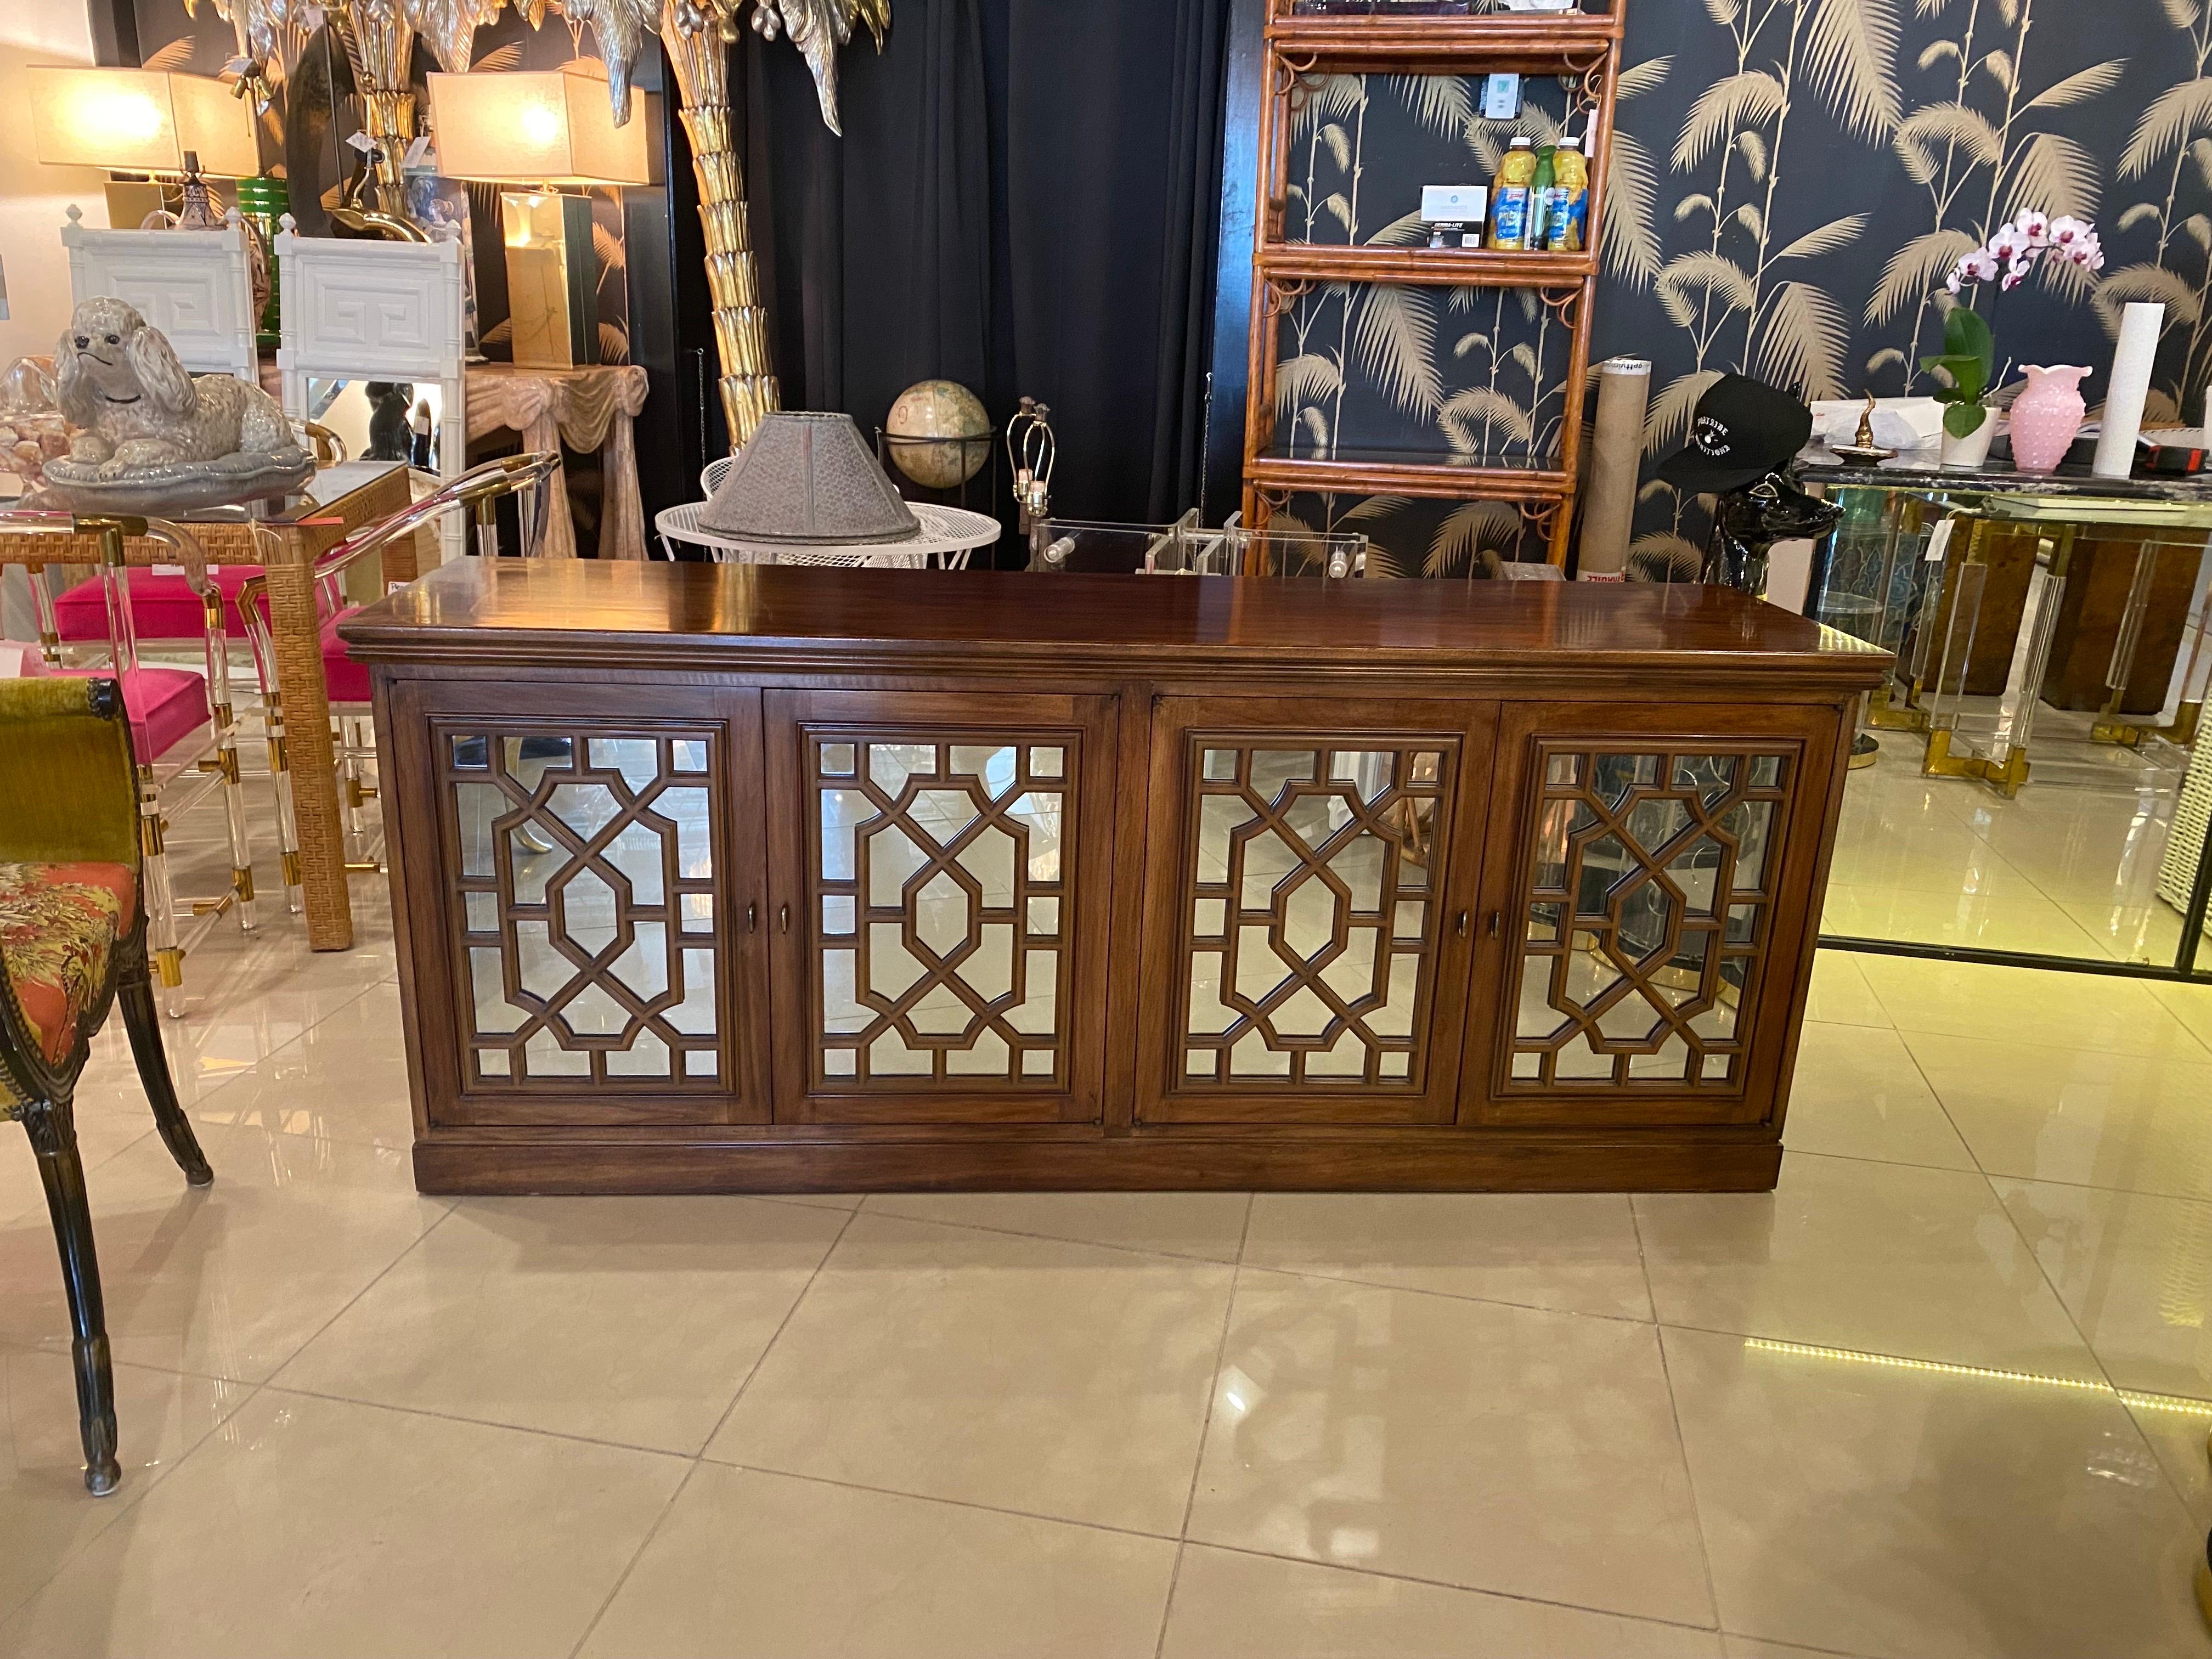 Beautiful vintage wood credenza, buffet, sideboard with mirrored doors and fretwork. Each pair of doors open to reveal one adjustable shelf on each side. There are a few scuffs and scratches on the original wood finish, pictured. This would be